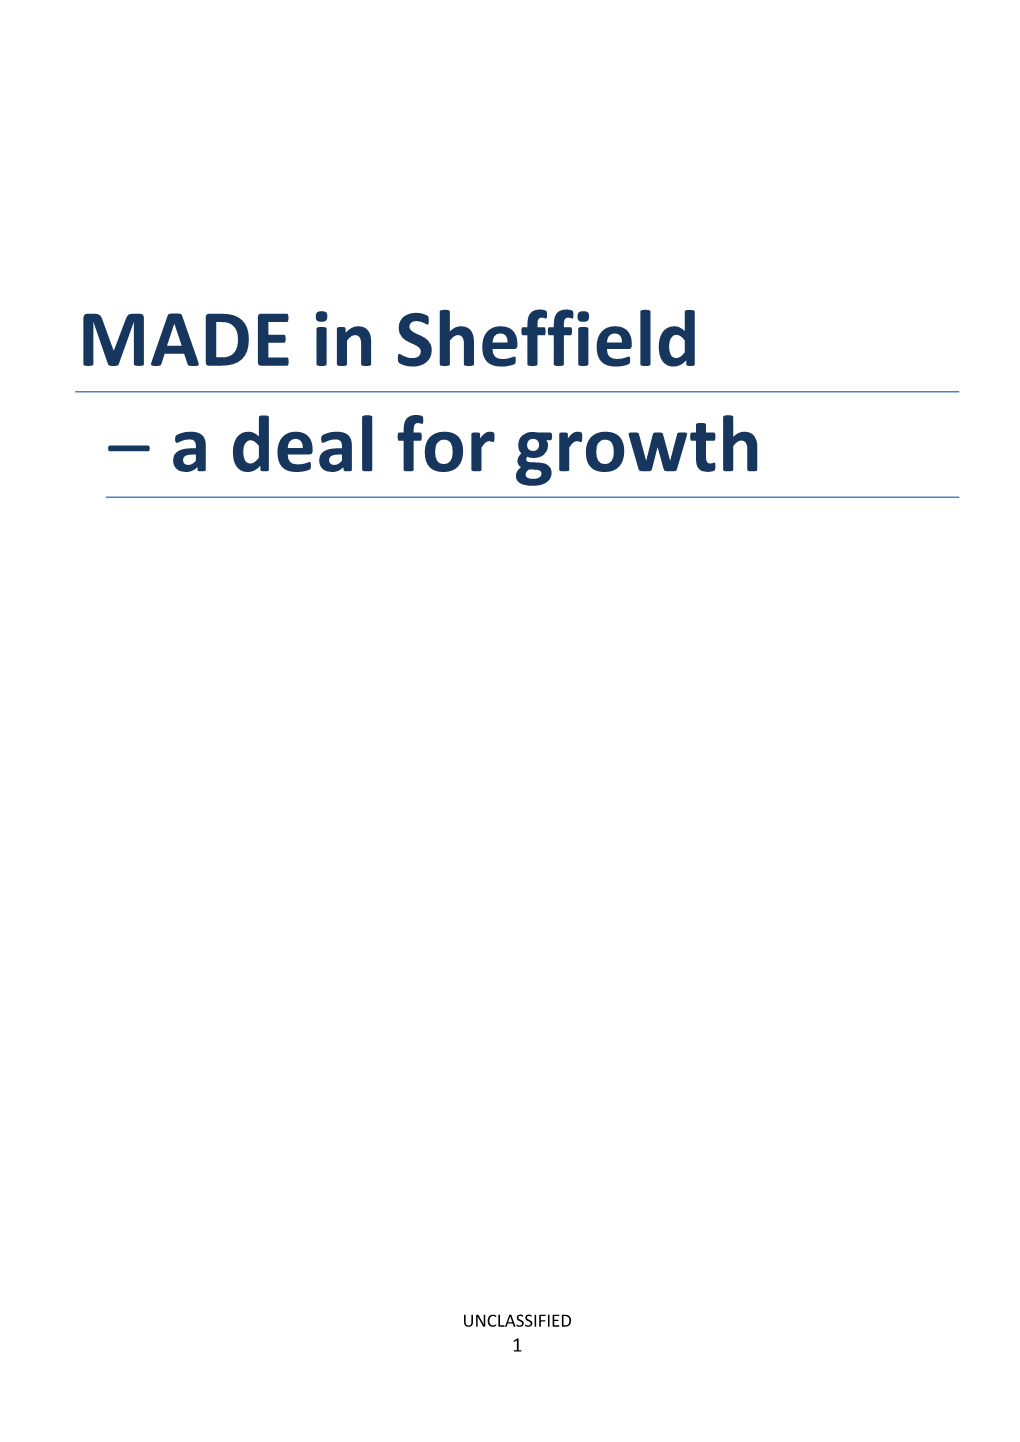 MADE in Sheffield – a Deal for Growth